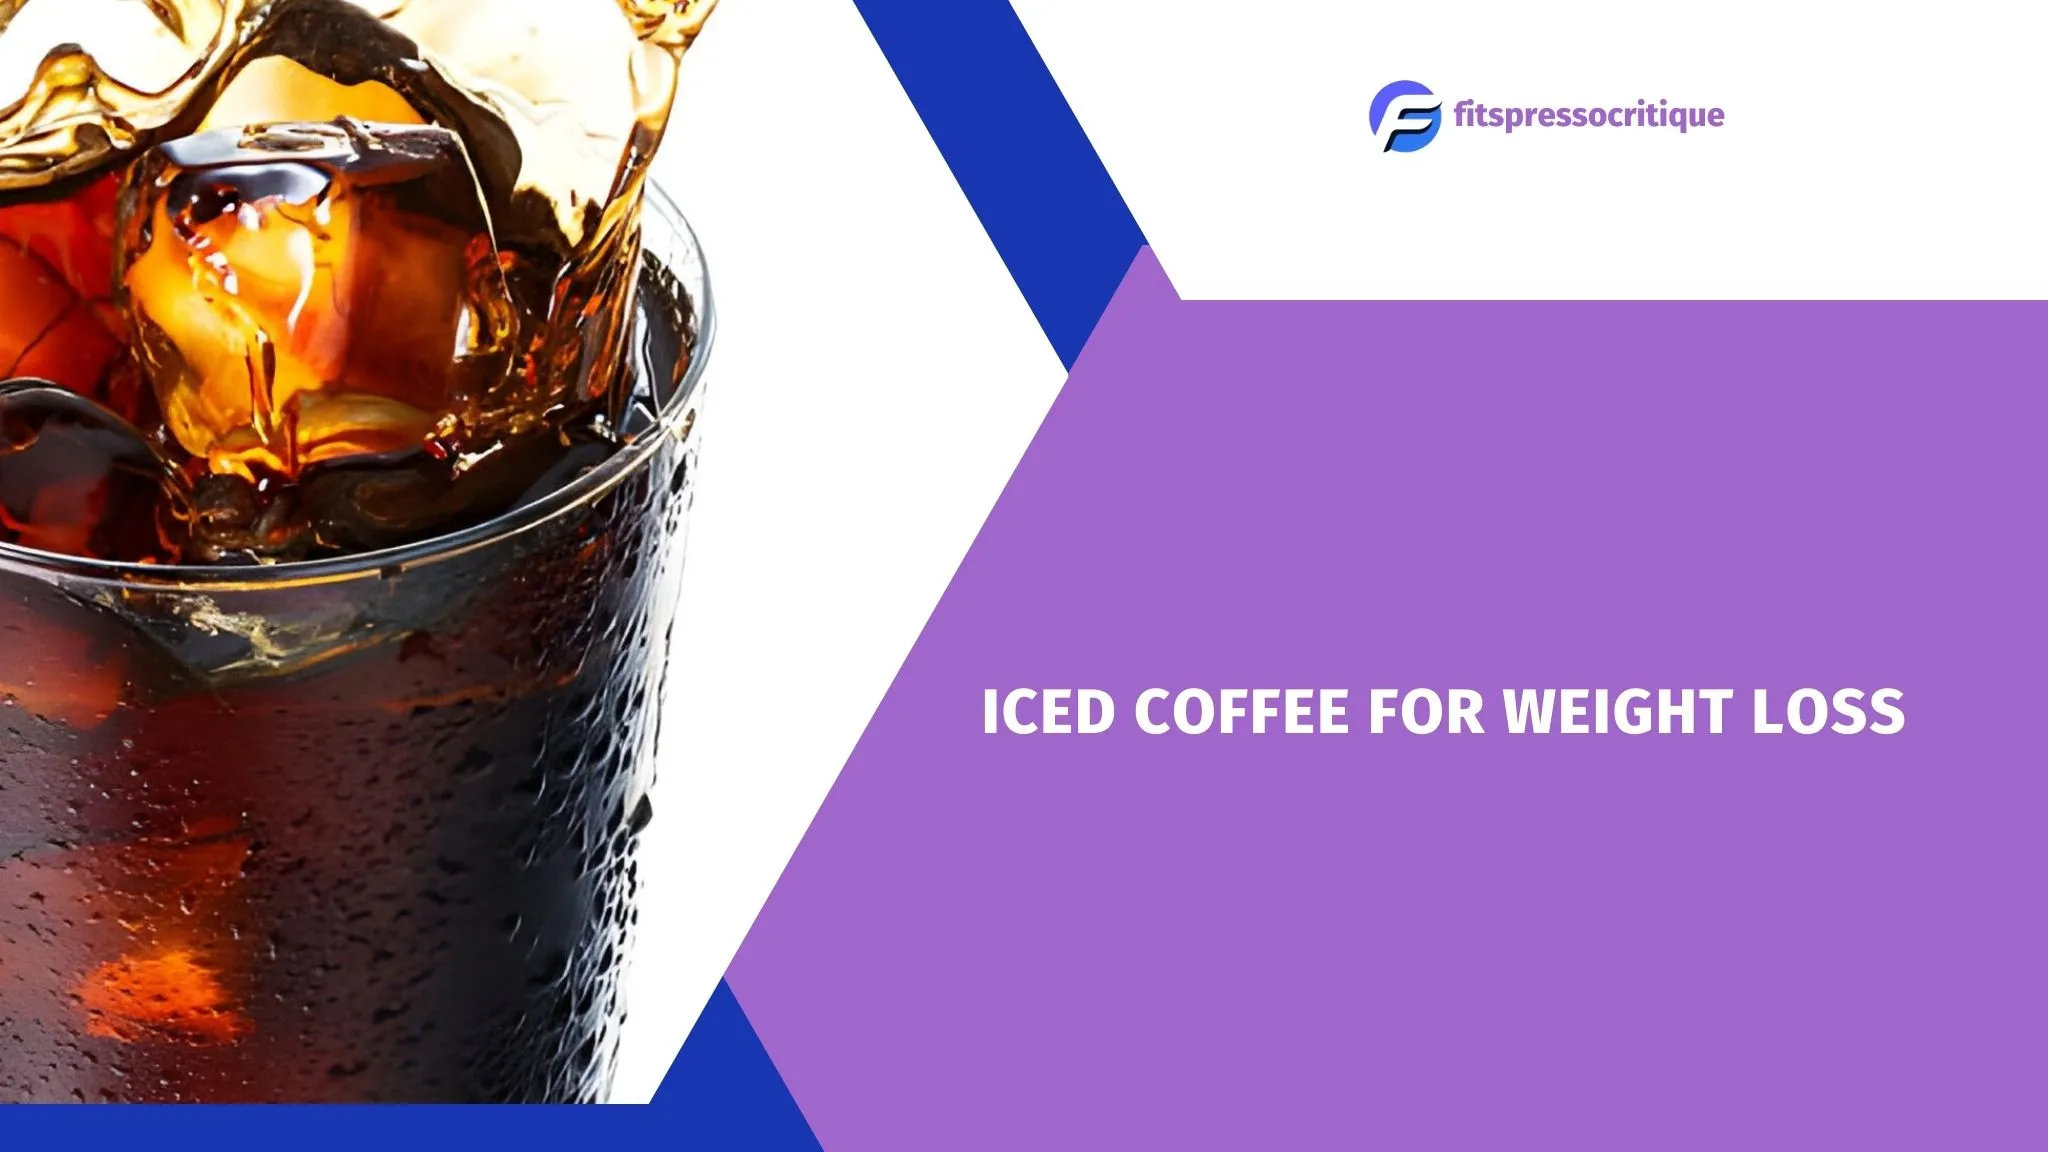 Iced Coffee For Weight Loss